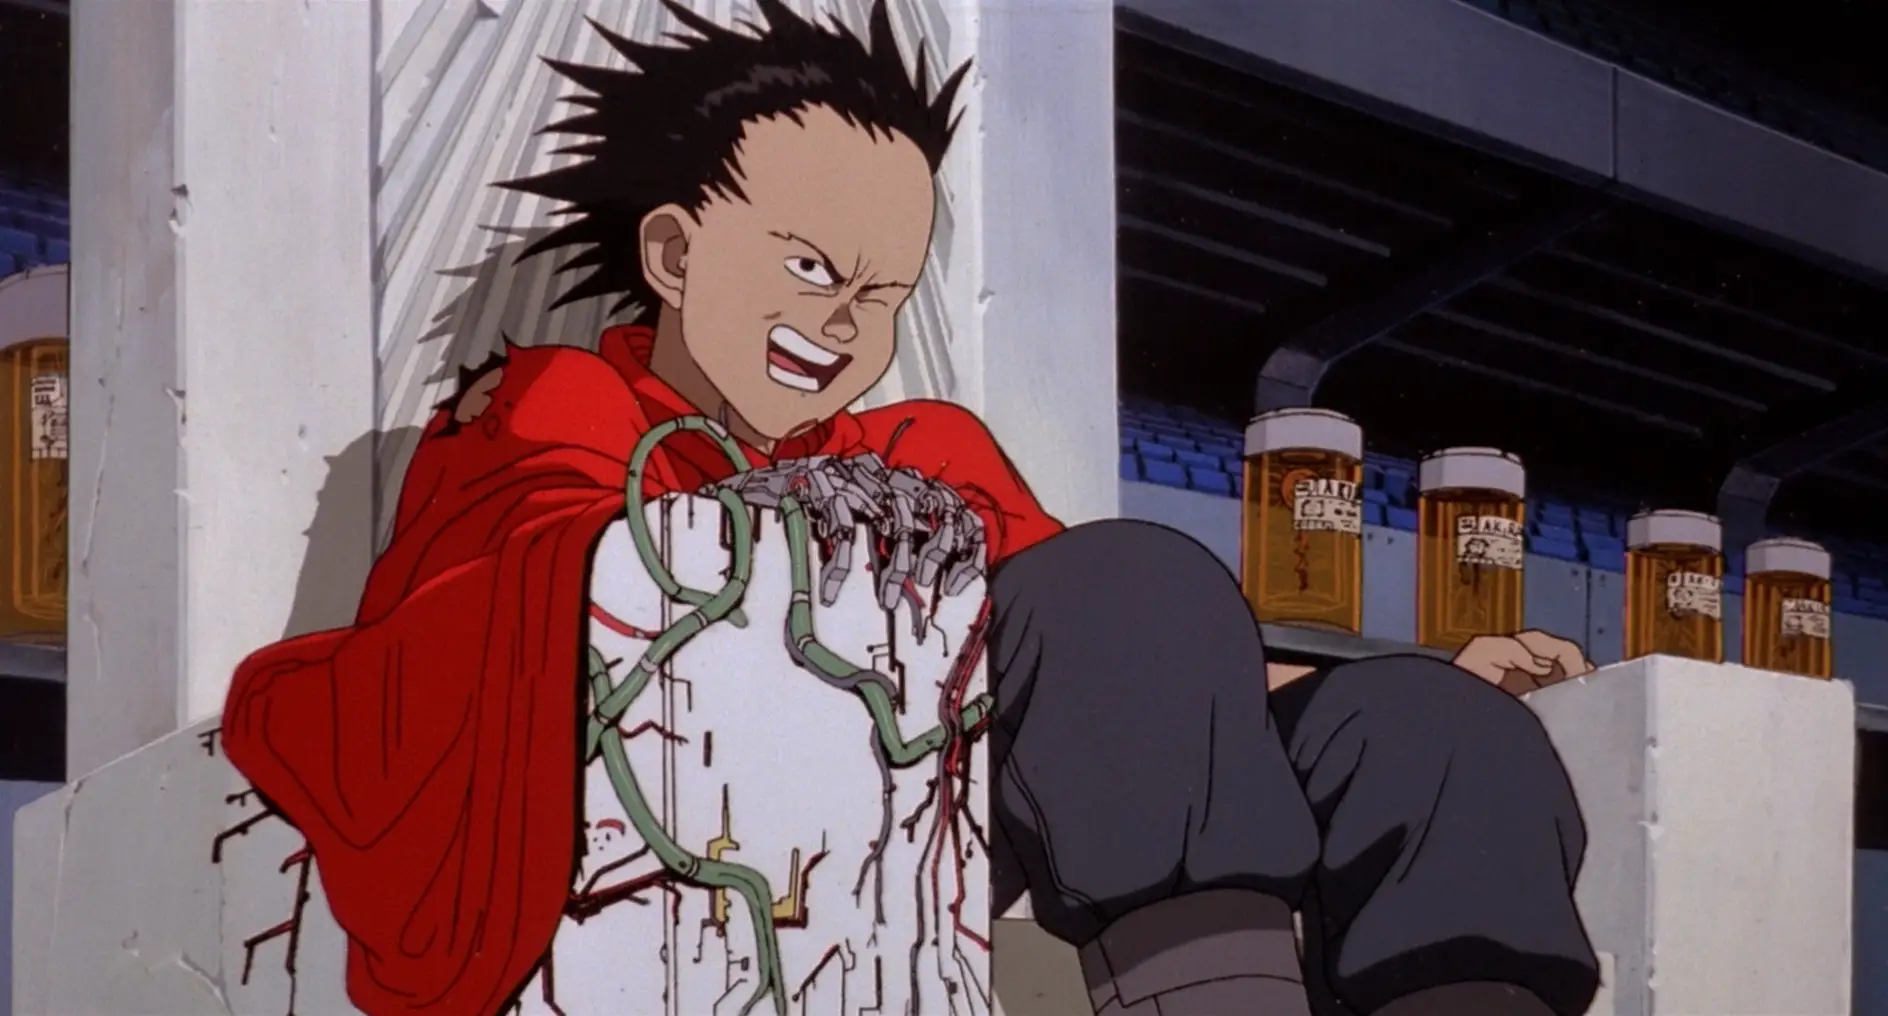 Still from Akira. Tetsuo sits on a throne in a red cape, with a leering expression. Green wires grow out of his robot arm. Behind him, a row of bottles contains tissues from Akira himself.